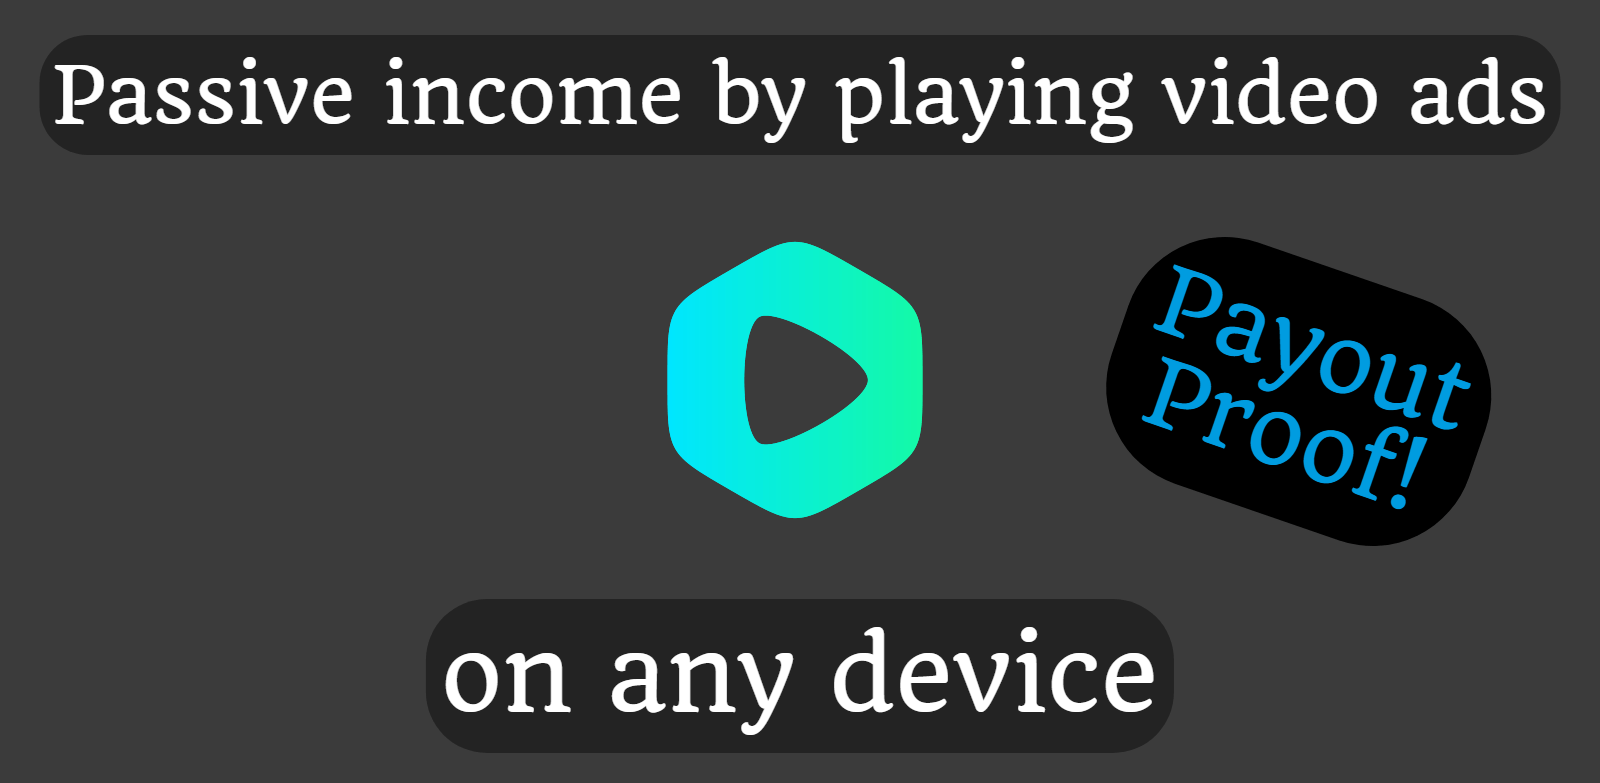 Passive income by playing video ads on any device